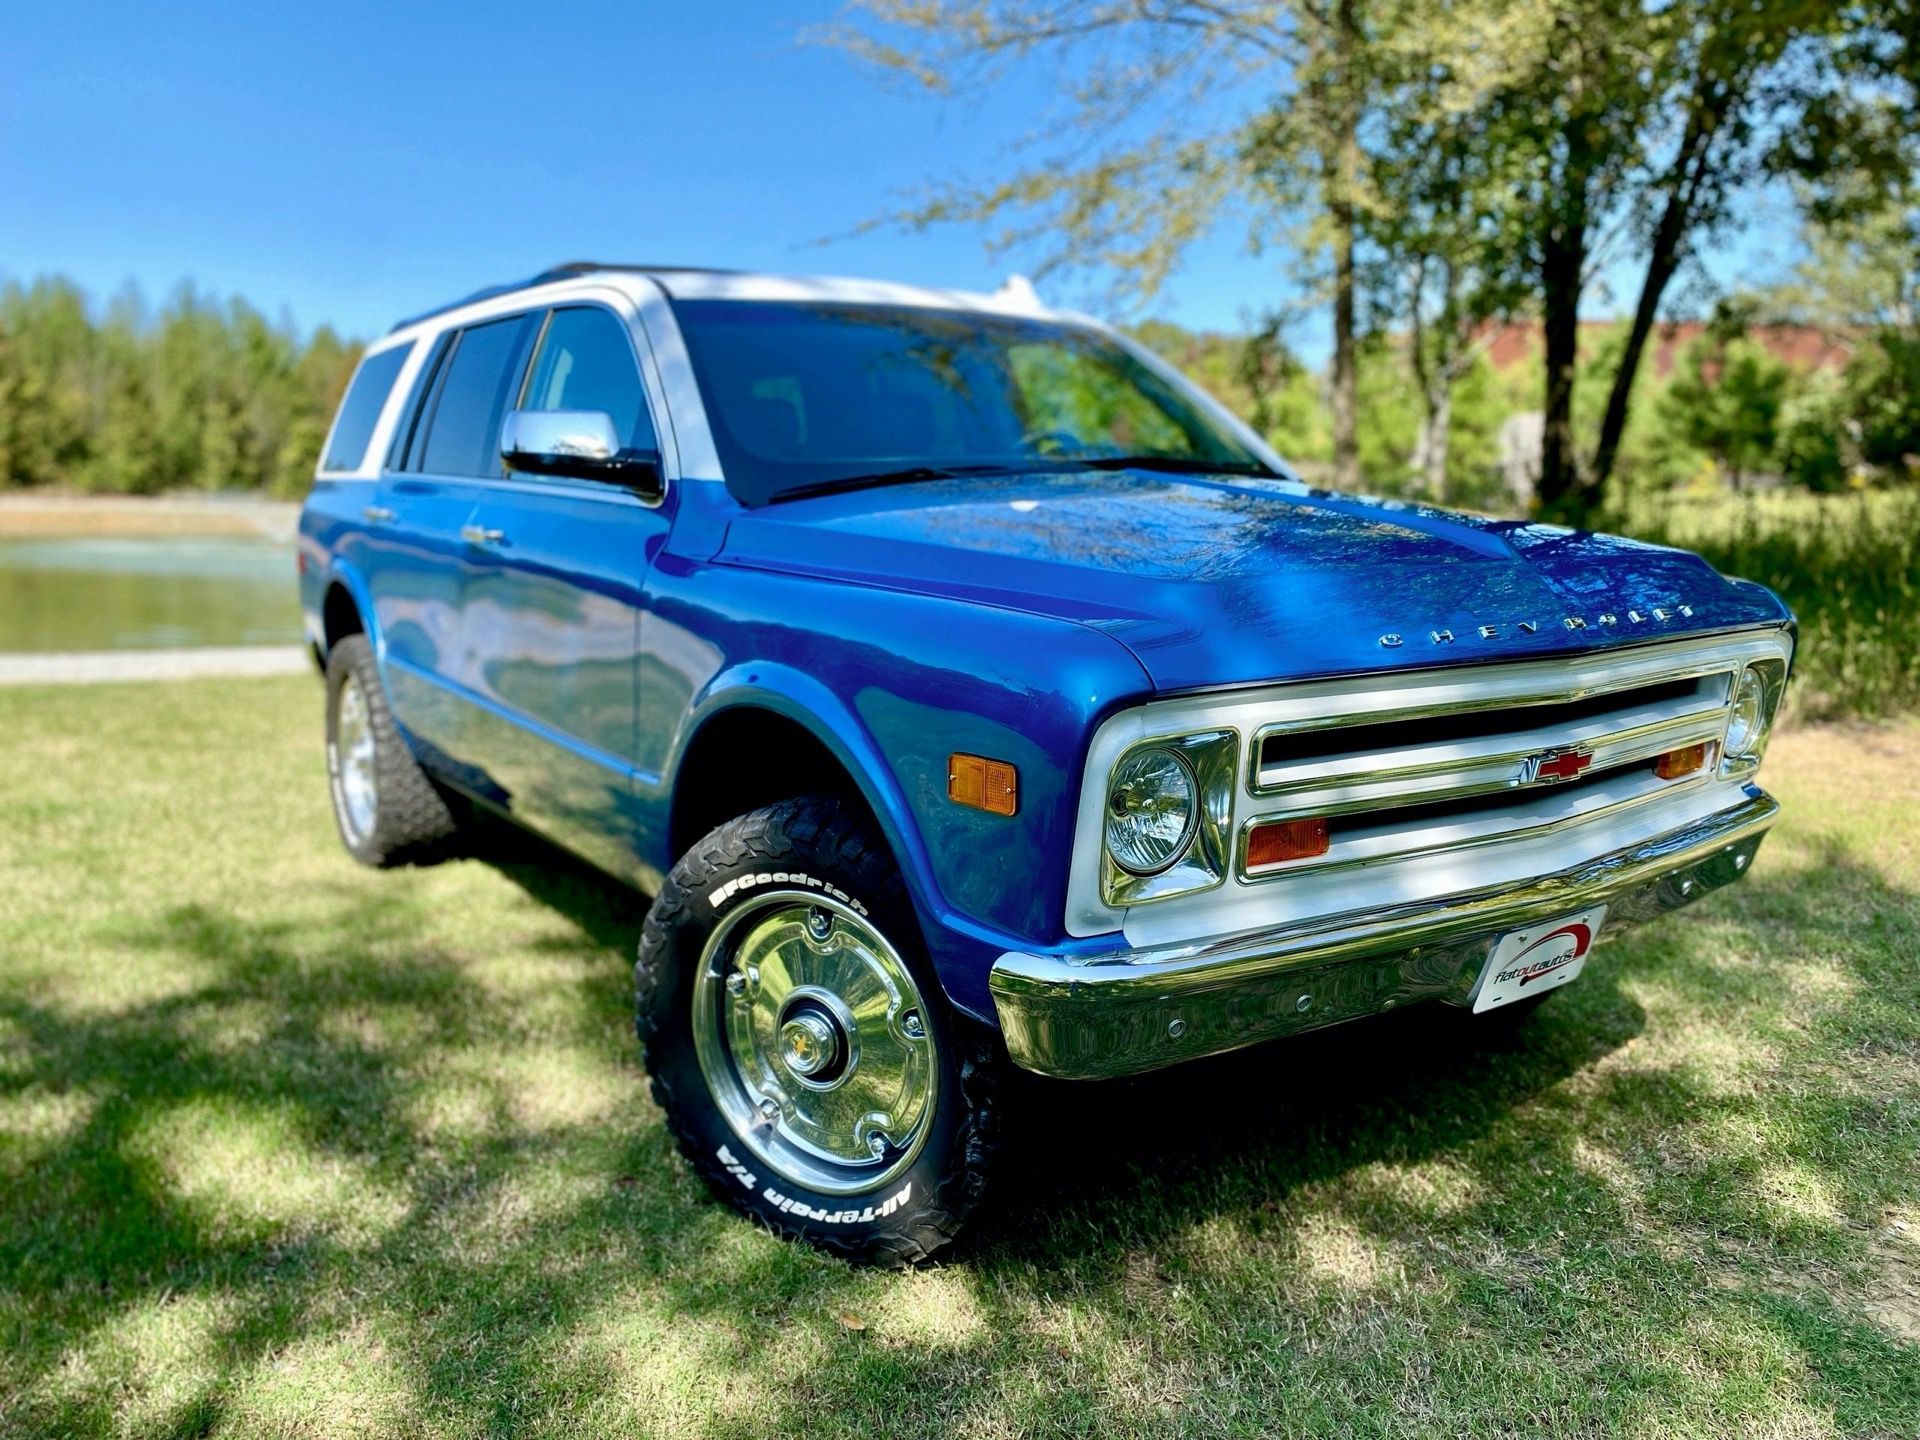 This Modern Day Chevy K5 Blazer Will Cost You $000 And A Tahoe, But It's Fit For Royalty!